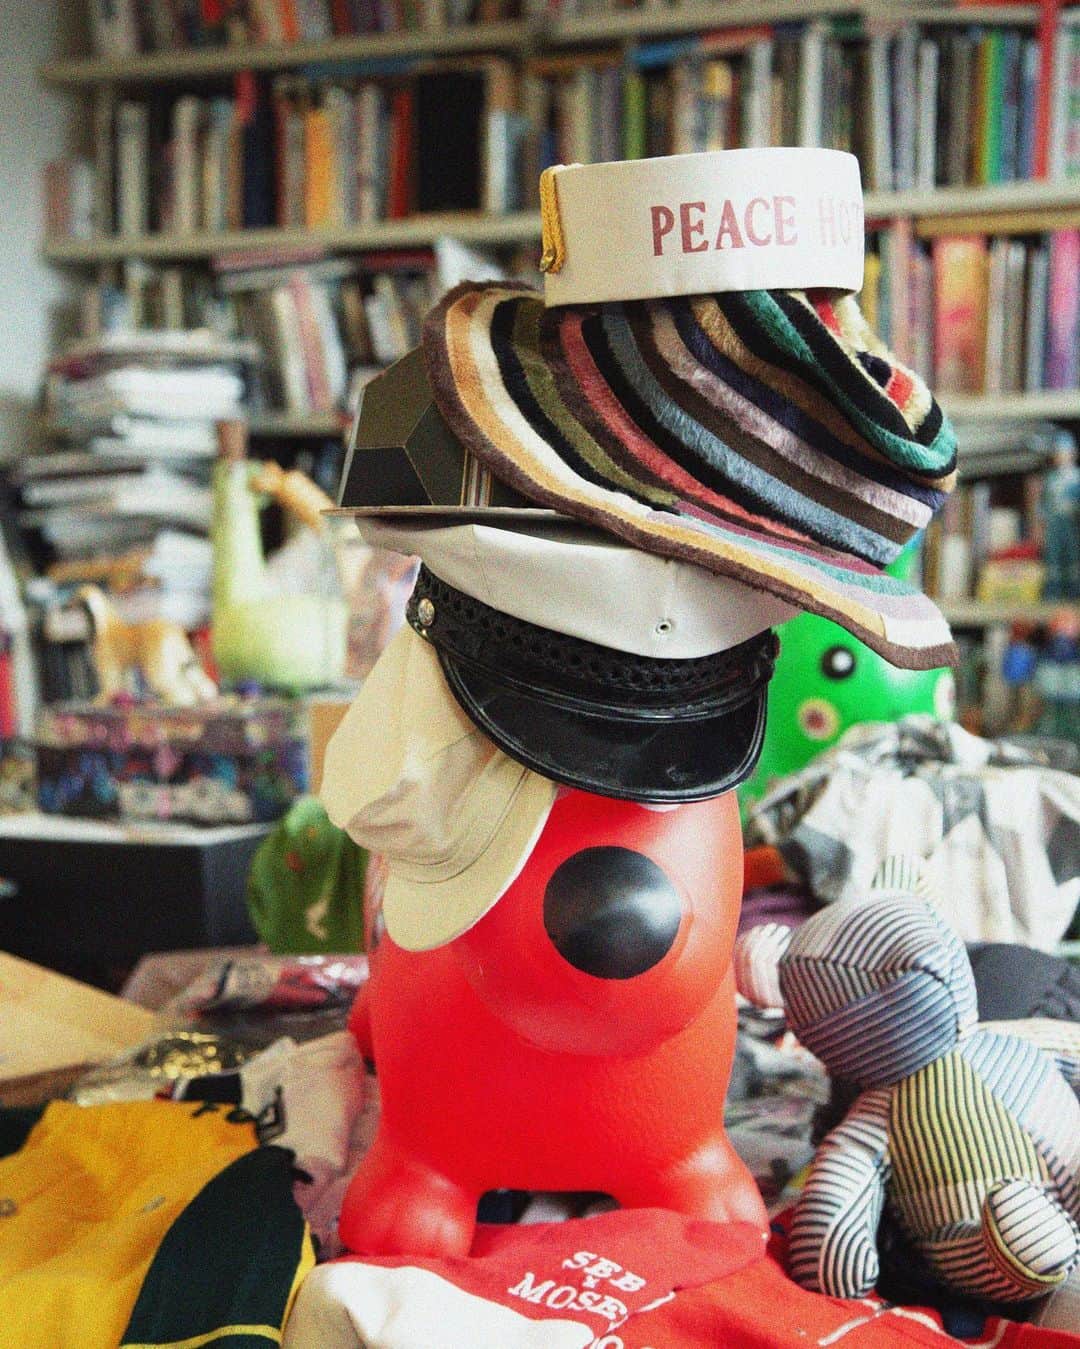 Paul Smithのインスタグラム：「I’ve collected hats from all corners of the world - from Japan to New Orleans - each with its own story. Today, over on @paulsmithdesign I’ll take you through some of my favourites in the next instalment of Office Sundays. 👒」